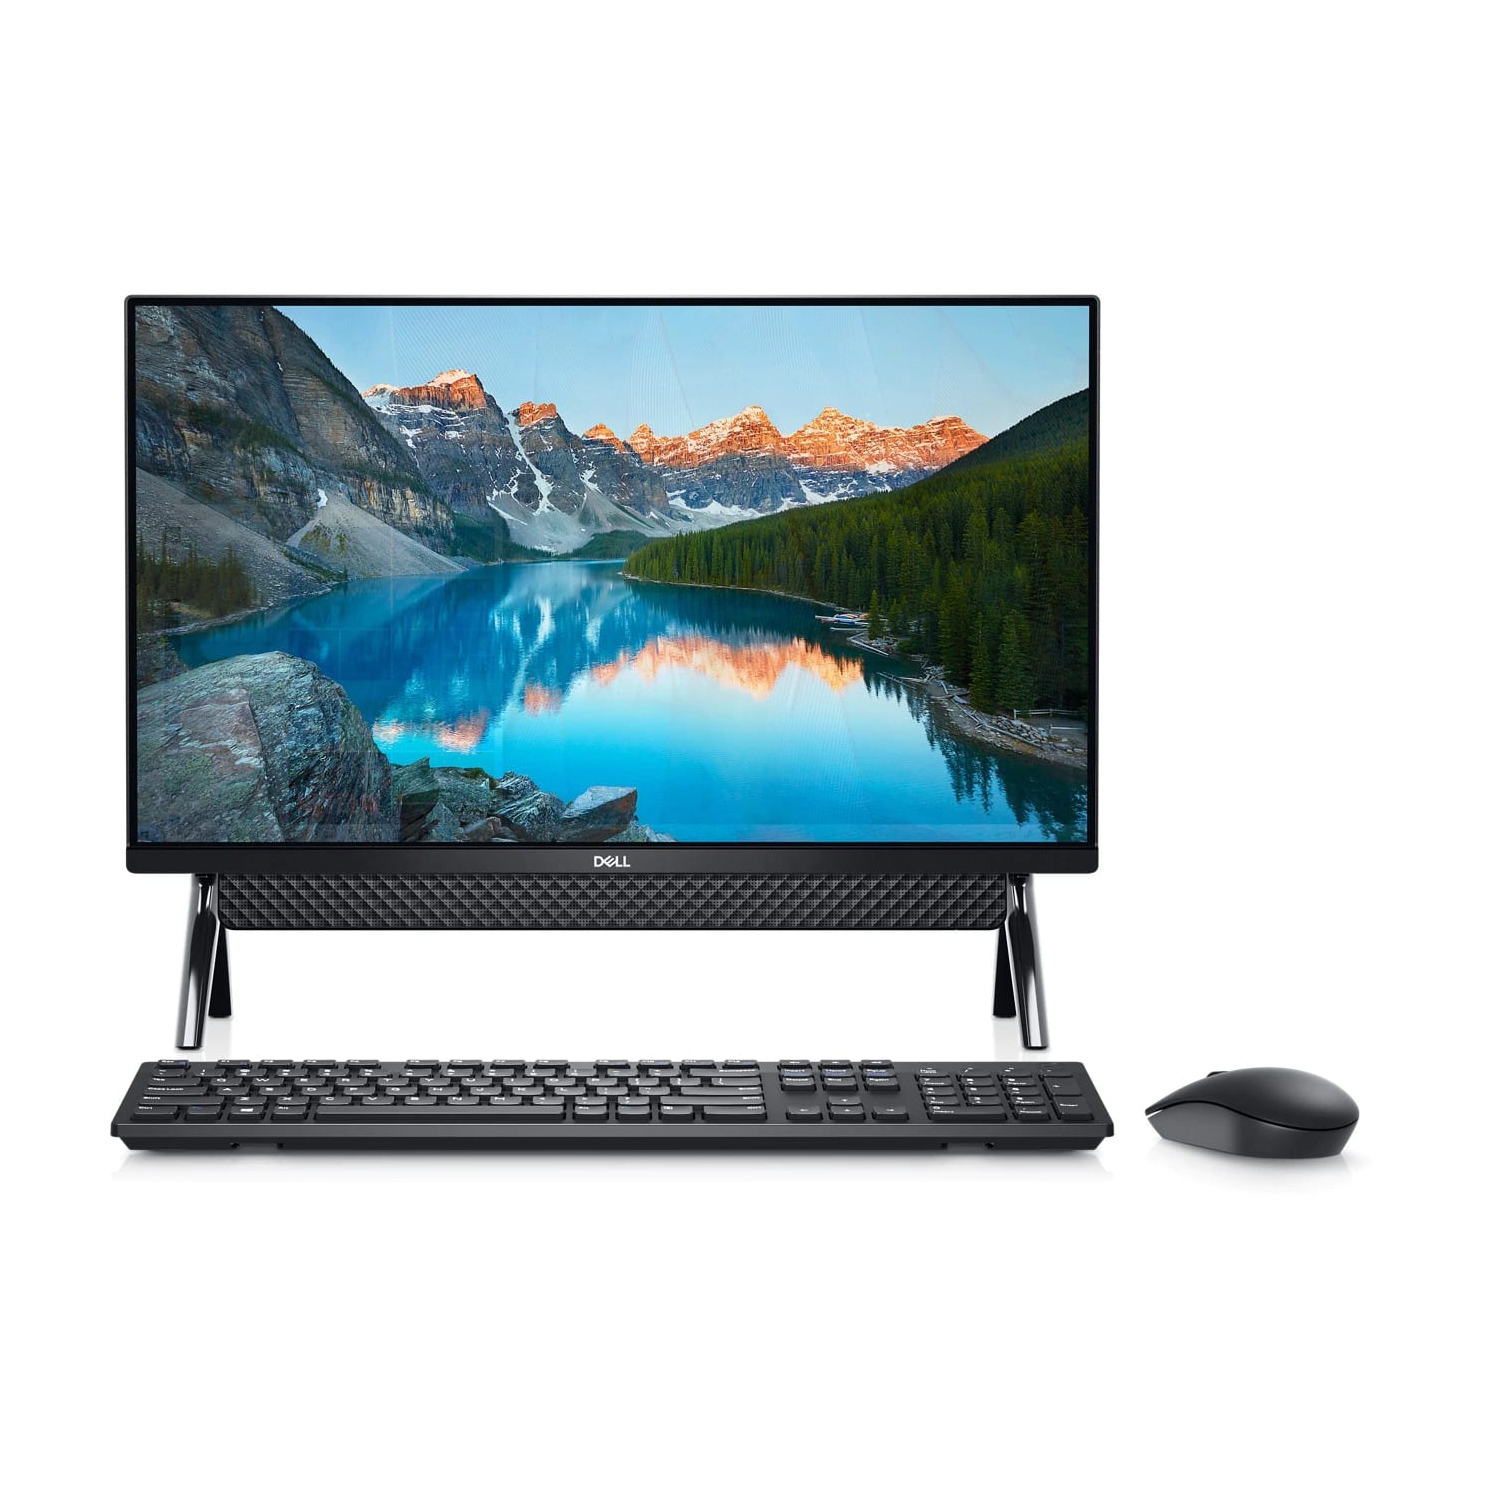 Refurbished (Excellent) - Dell Inspiron 24 5400 AIO (2020) | 24" FHD | Core i5 - 512GB SSD - 8GB RAM | 4 Cores @ 4.2 GHz - 11th Gen CPU Certified Refurbished